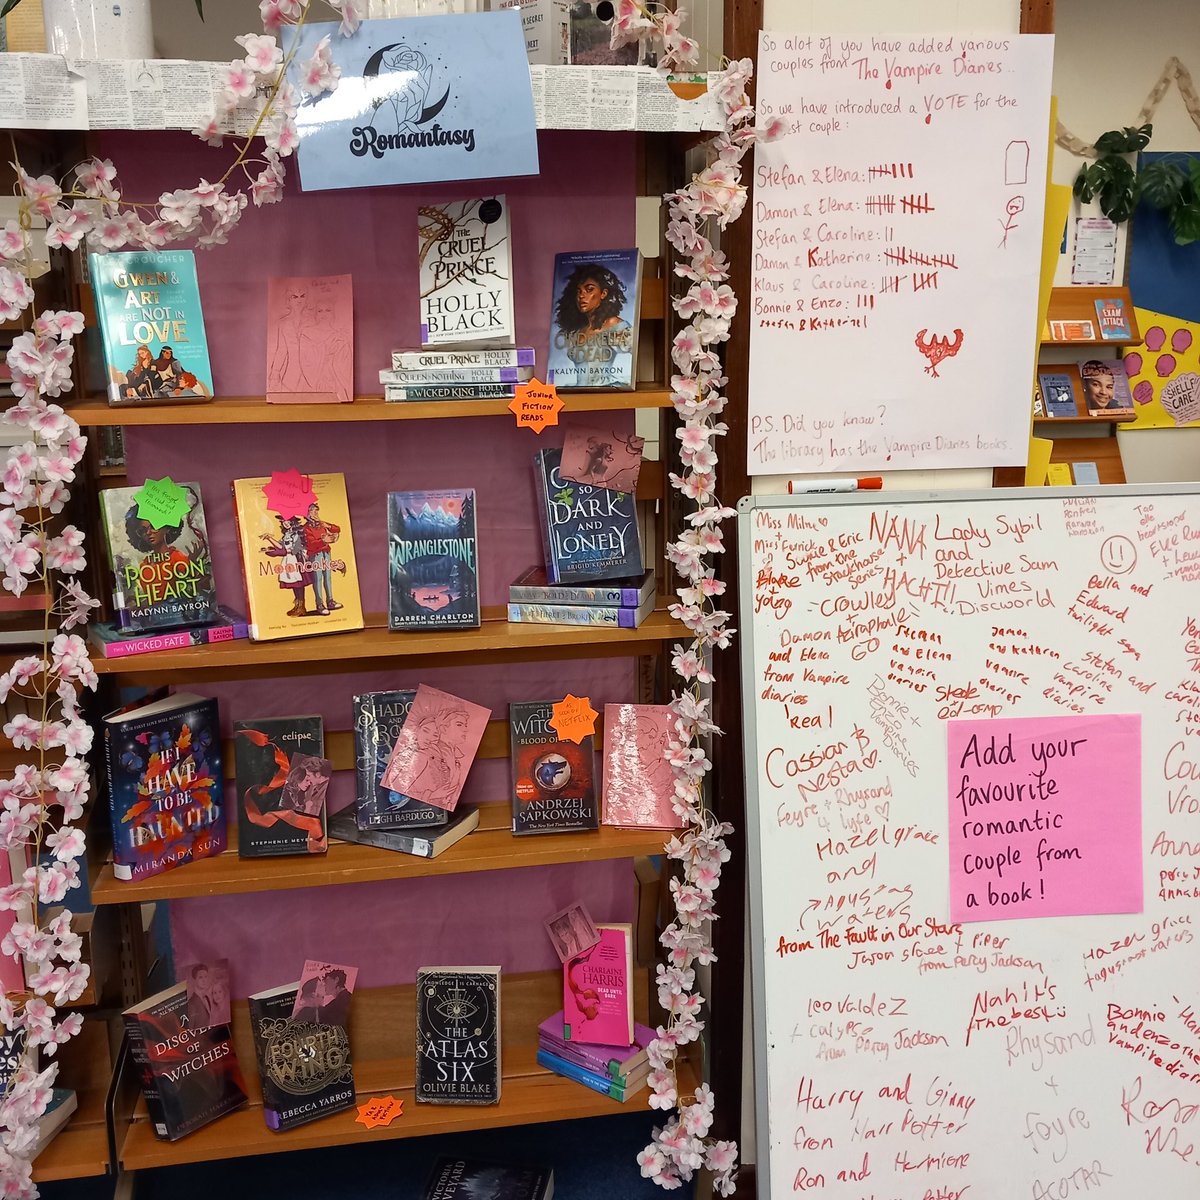 Our Romantasy display was a really popular one! As was the board asking who learners' favourite romantic couple from a book were! 💖

The debate over the The Vampire Diaries by LJ Smith got so out of hand that we had to create a whole separate voting sheet! 🤣

@FraserburghAcad